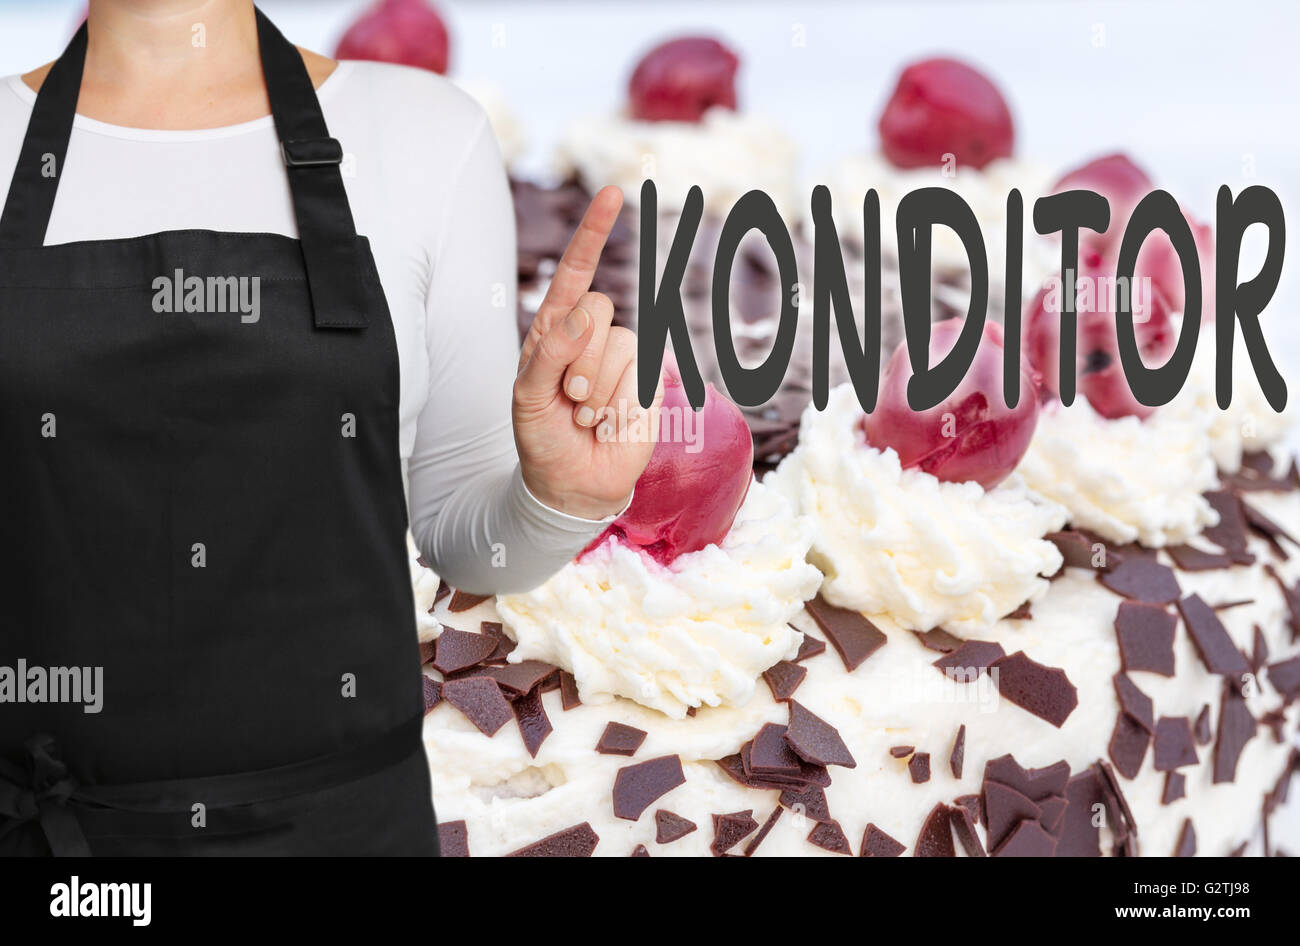 Konditor (in german Confectioner) with cake background concept template. Stock Photo